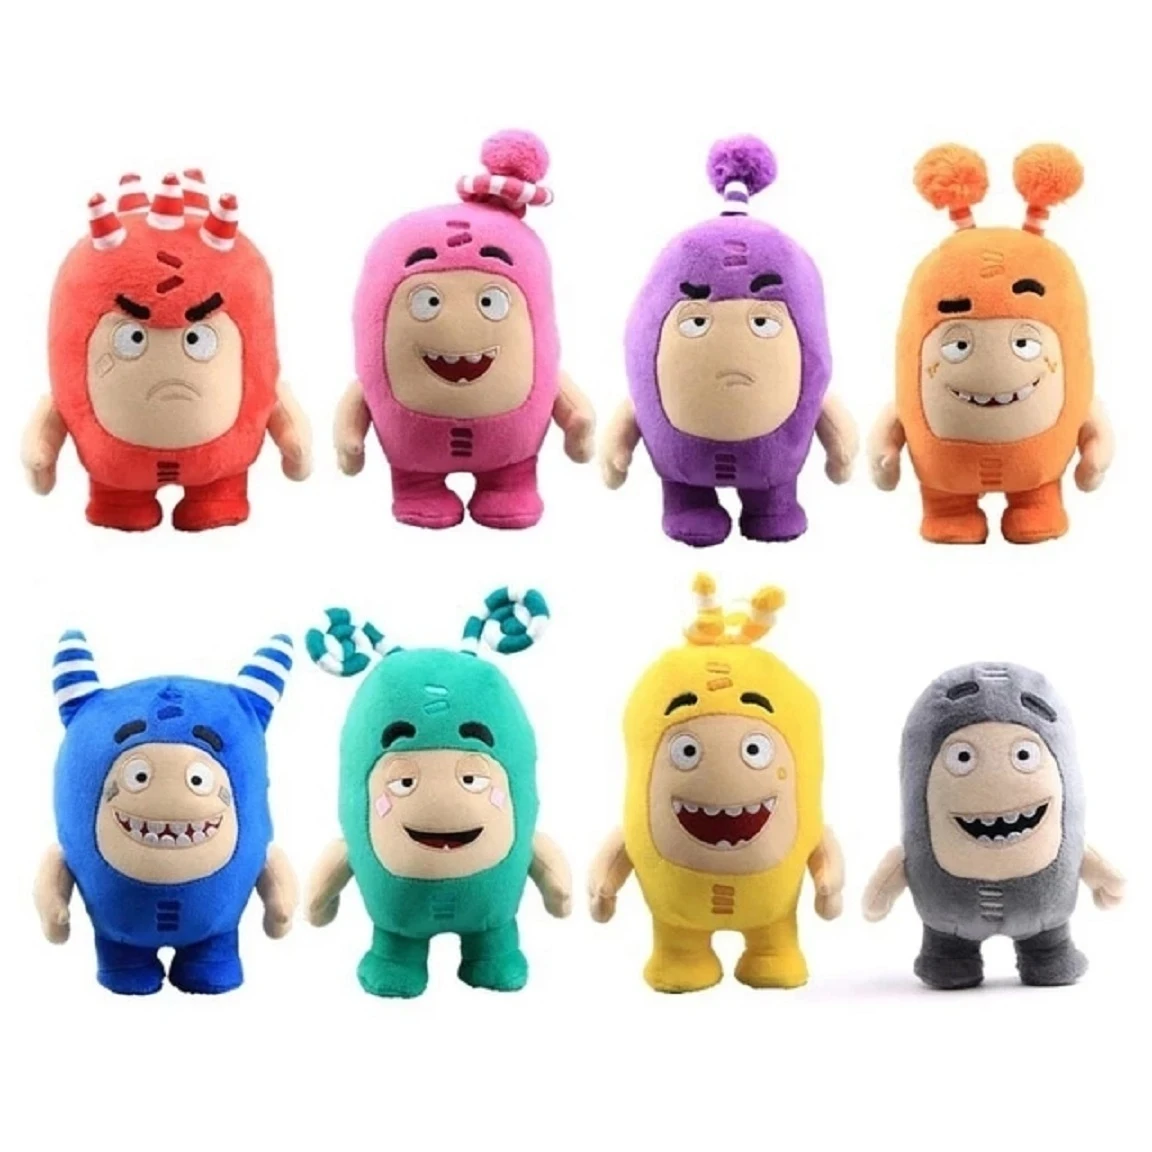 8pcs/Lot Oddbods Cartoon 18-24CM Fuse Jeff Newt Odd ZEE Bods Stuffed Plush Toy Doll For Kids Gifts PP Cotton Home Decoration 8pcs lot led spot foco mr11 gu4 ac dc 12v 3w warm white led light lamp for home decortion replace 20w 25w halogenlamp